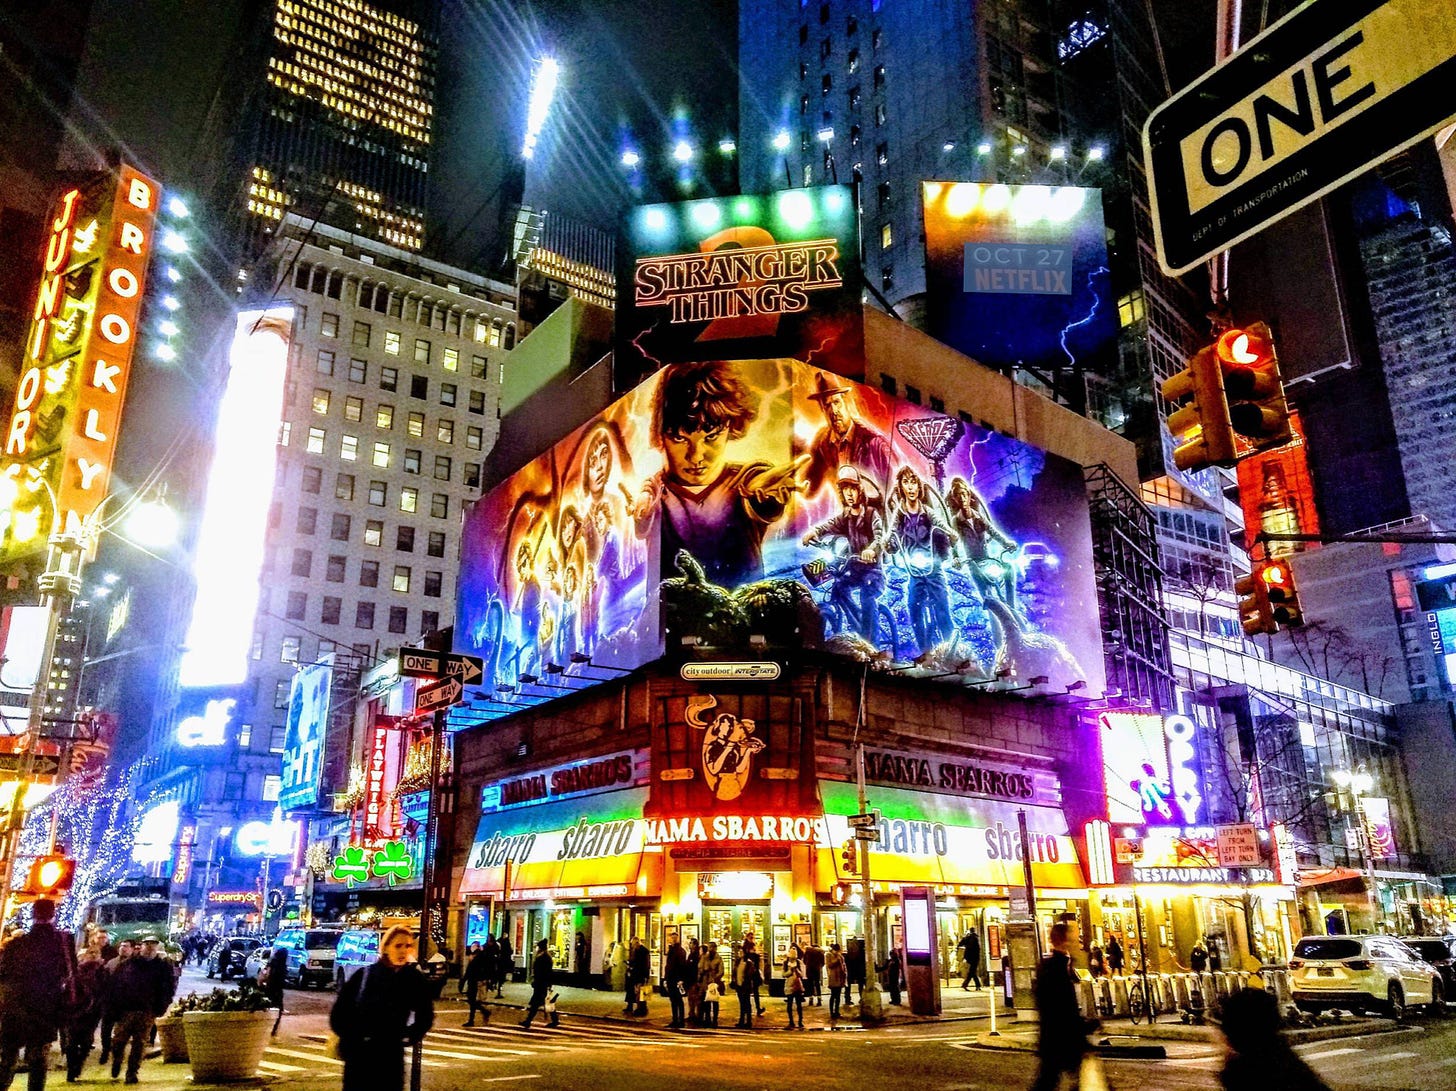 Times Square at night from street level, looking up at a very large billboard advertising Stranger Things, the Netflix series